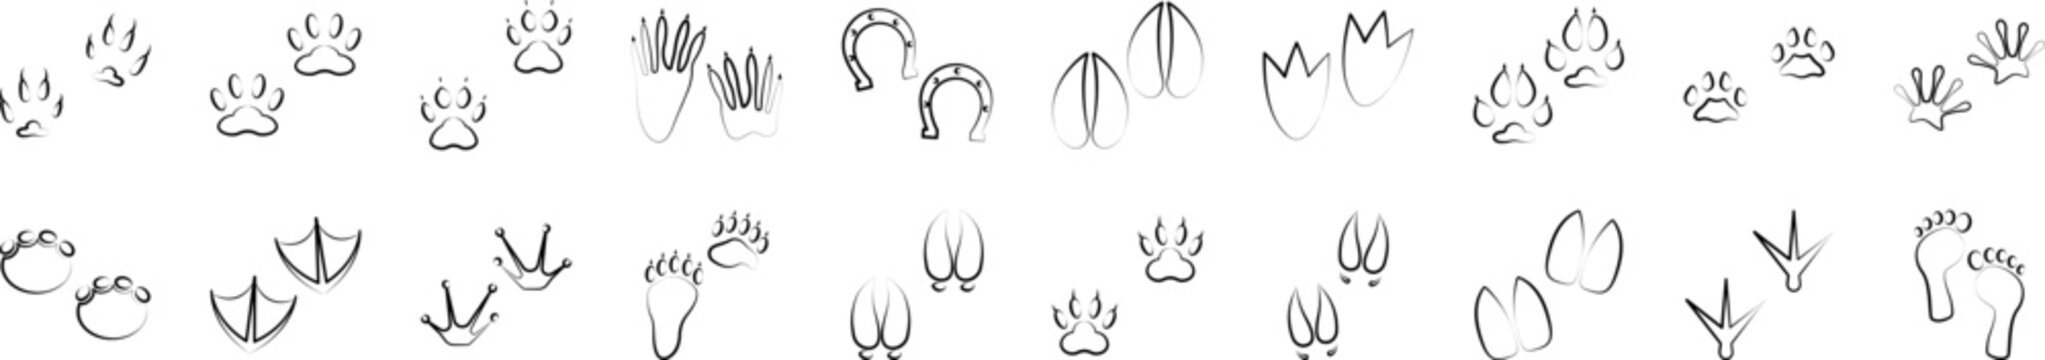 Animal tracks guide icons collection vector illustration design